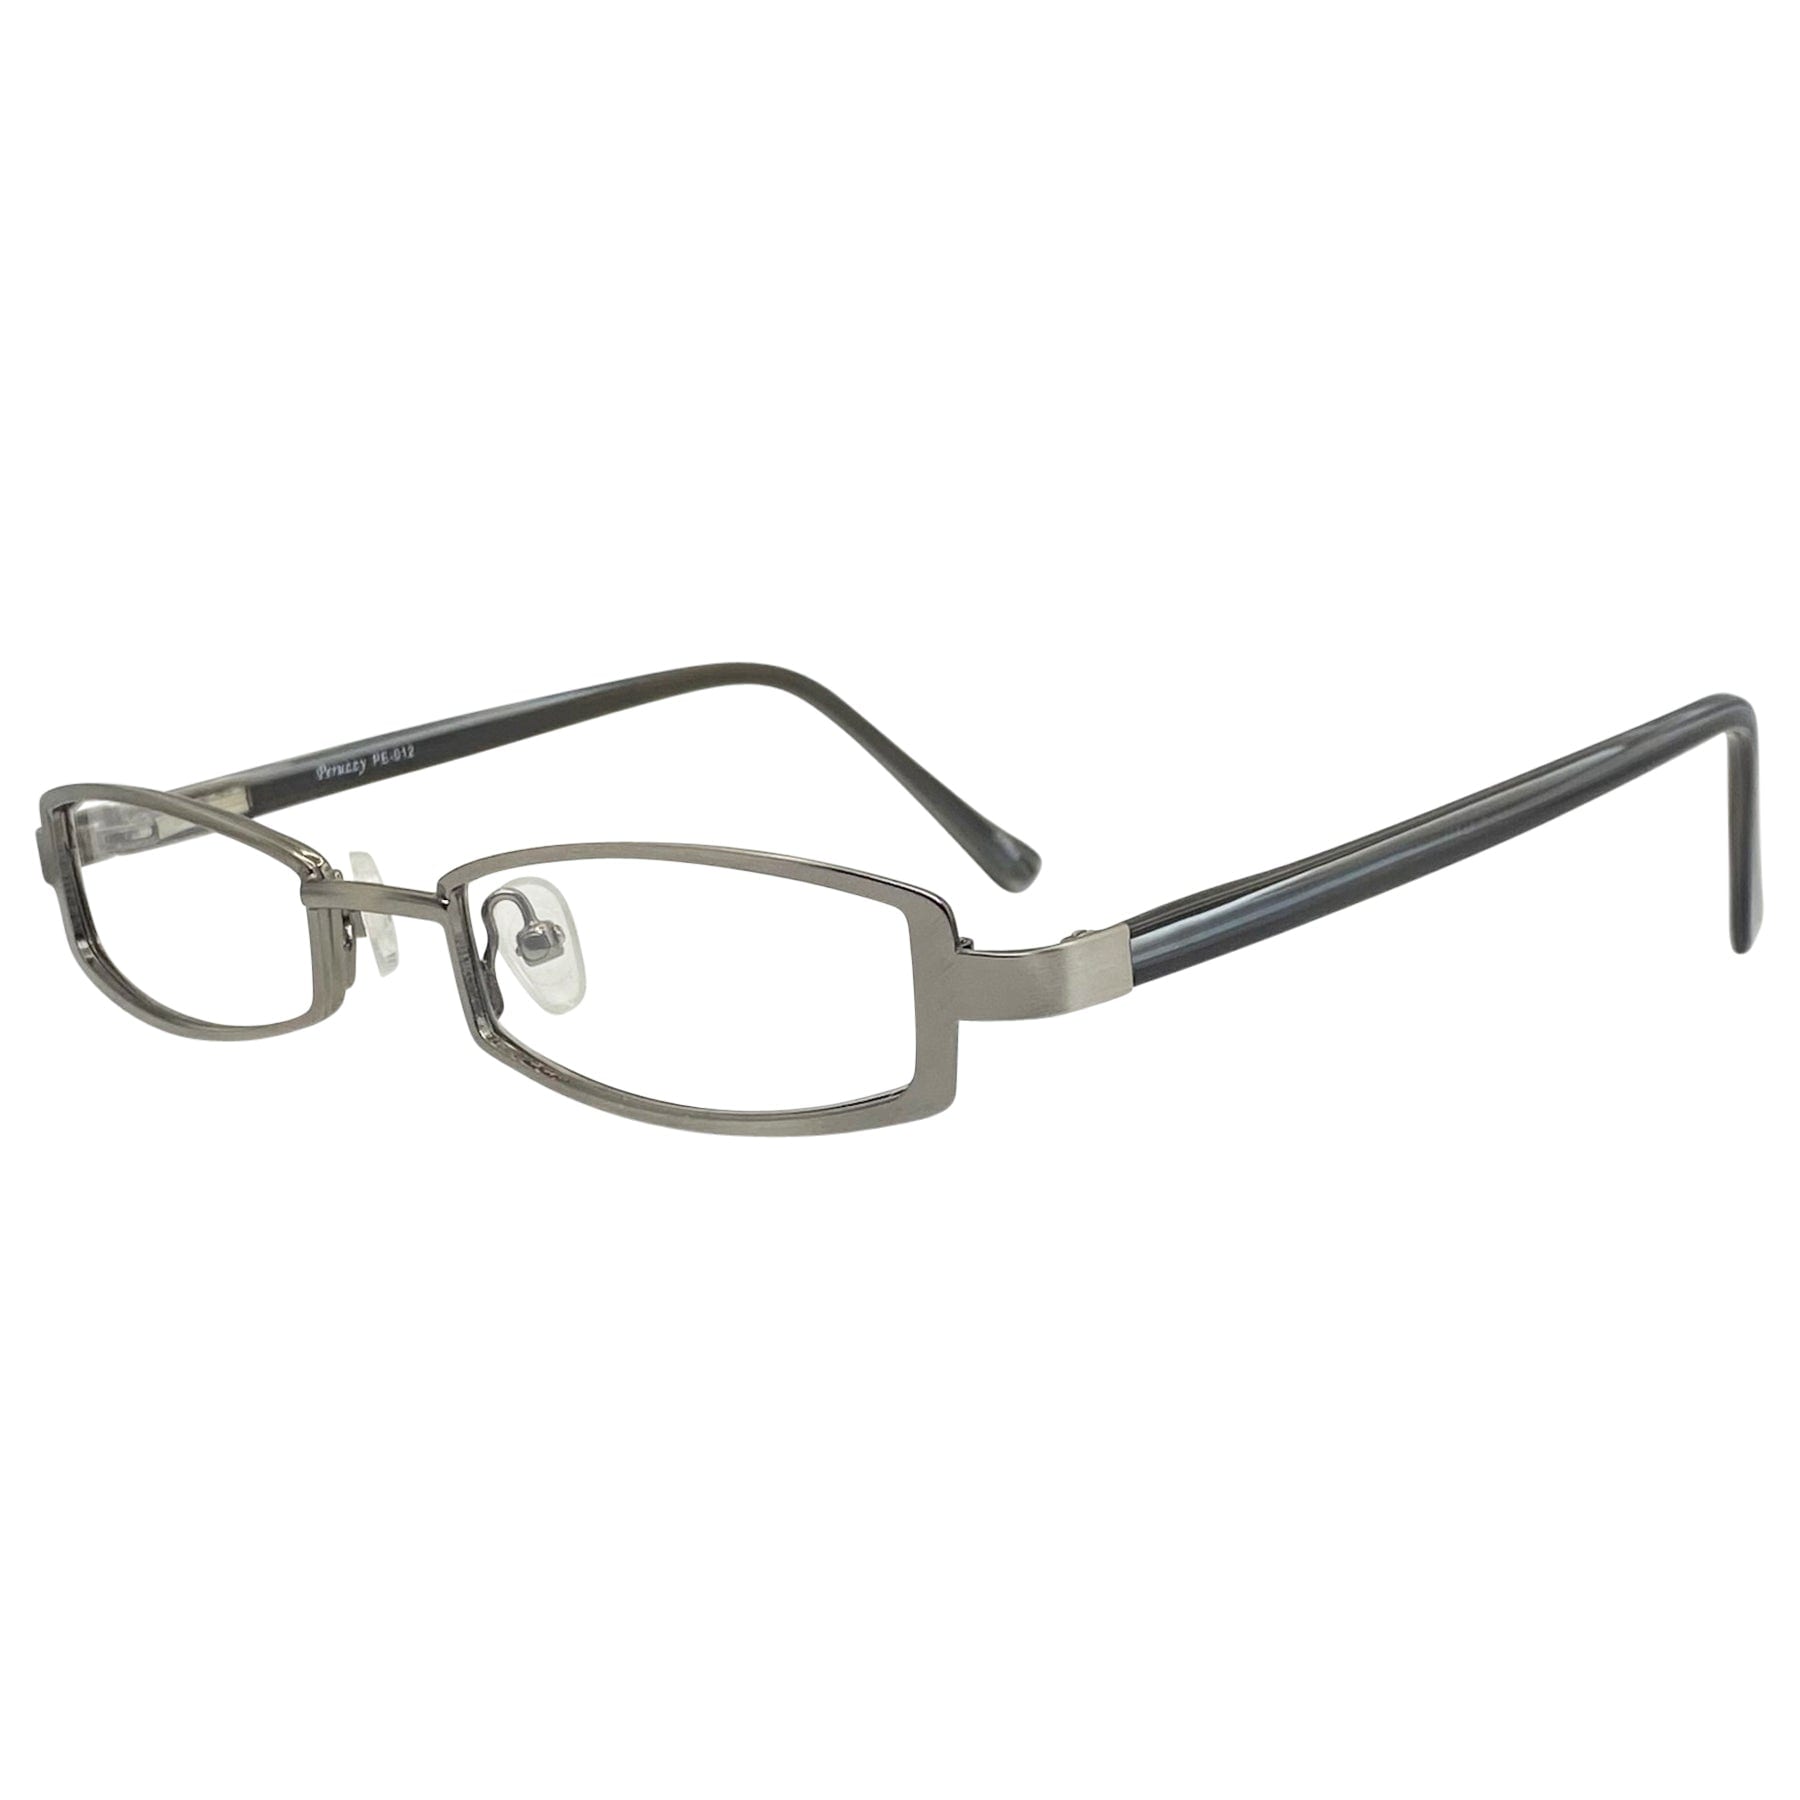 true vintage rectangular frame with a clear 90s style